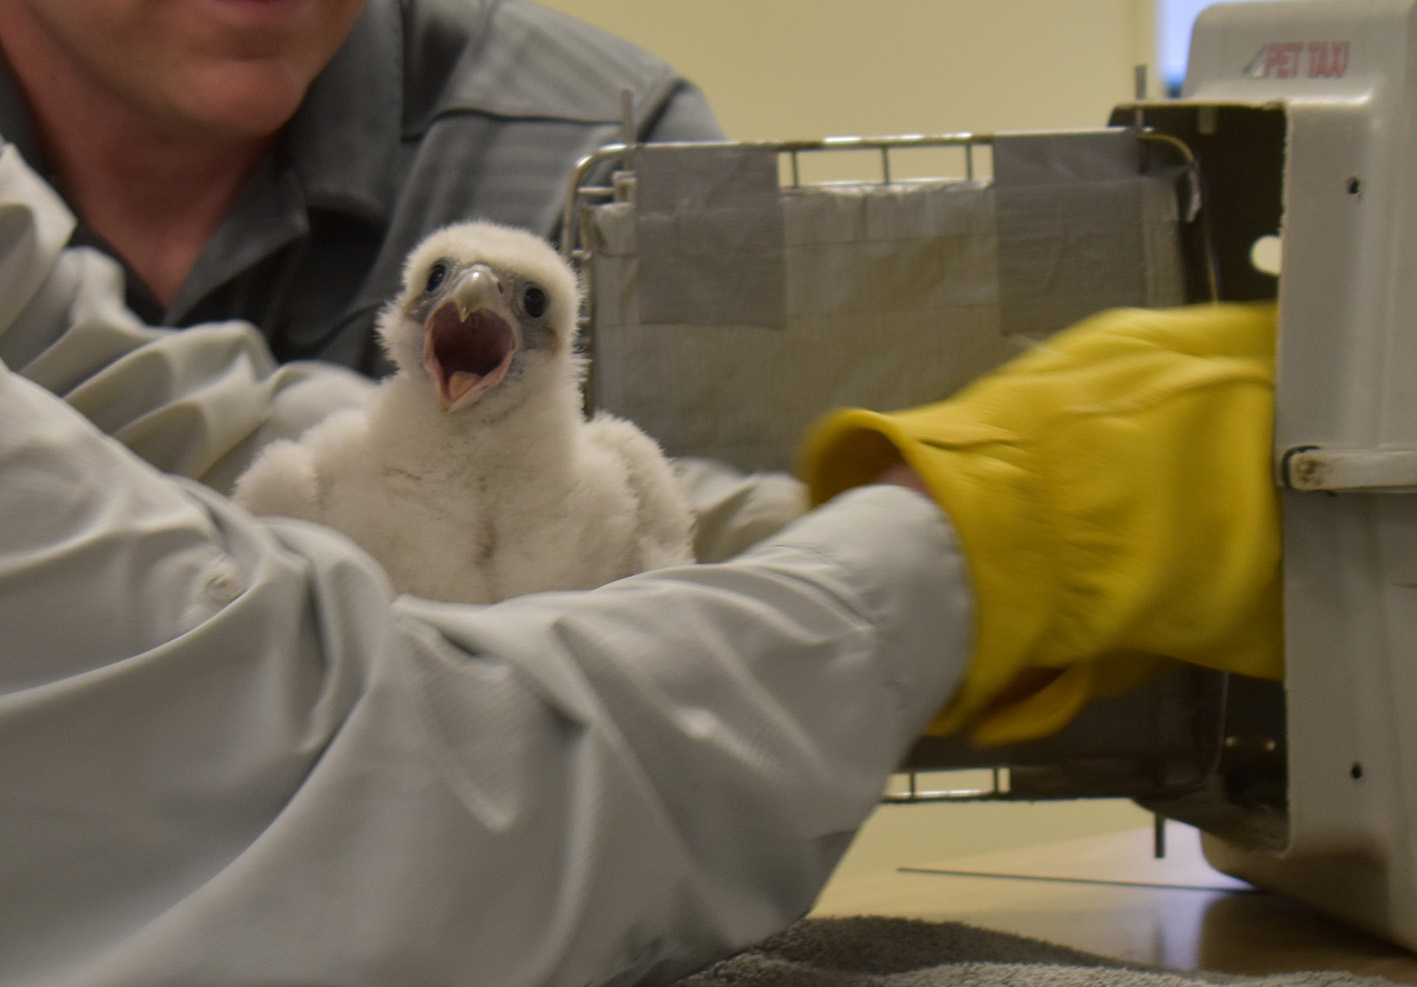 A peregrine falcon chick protests as it is getting a leg band applied